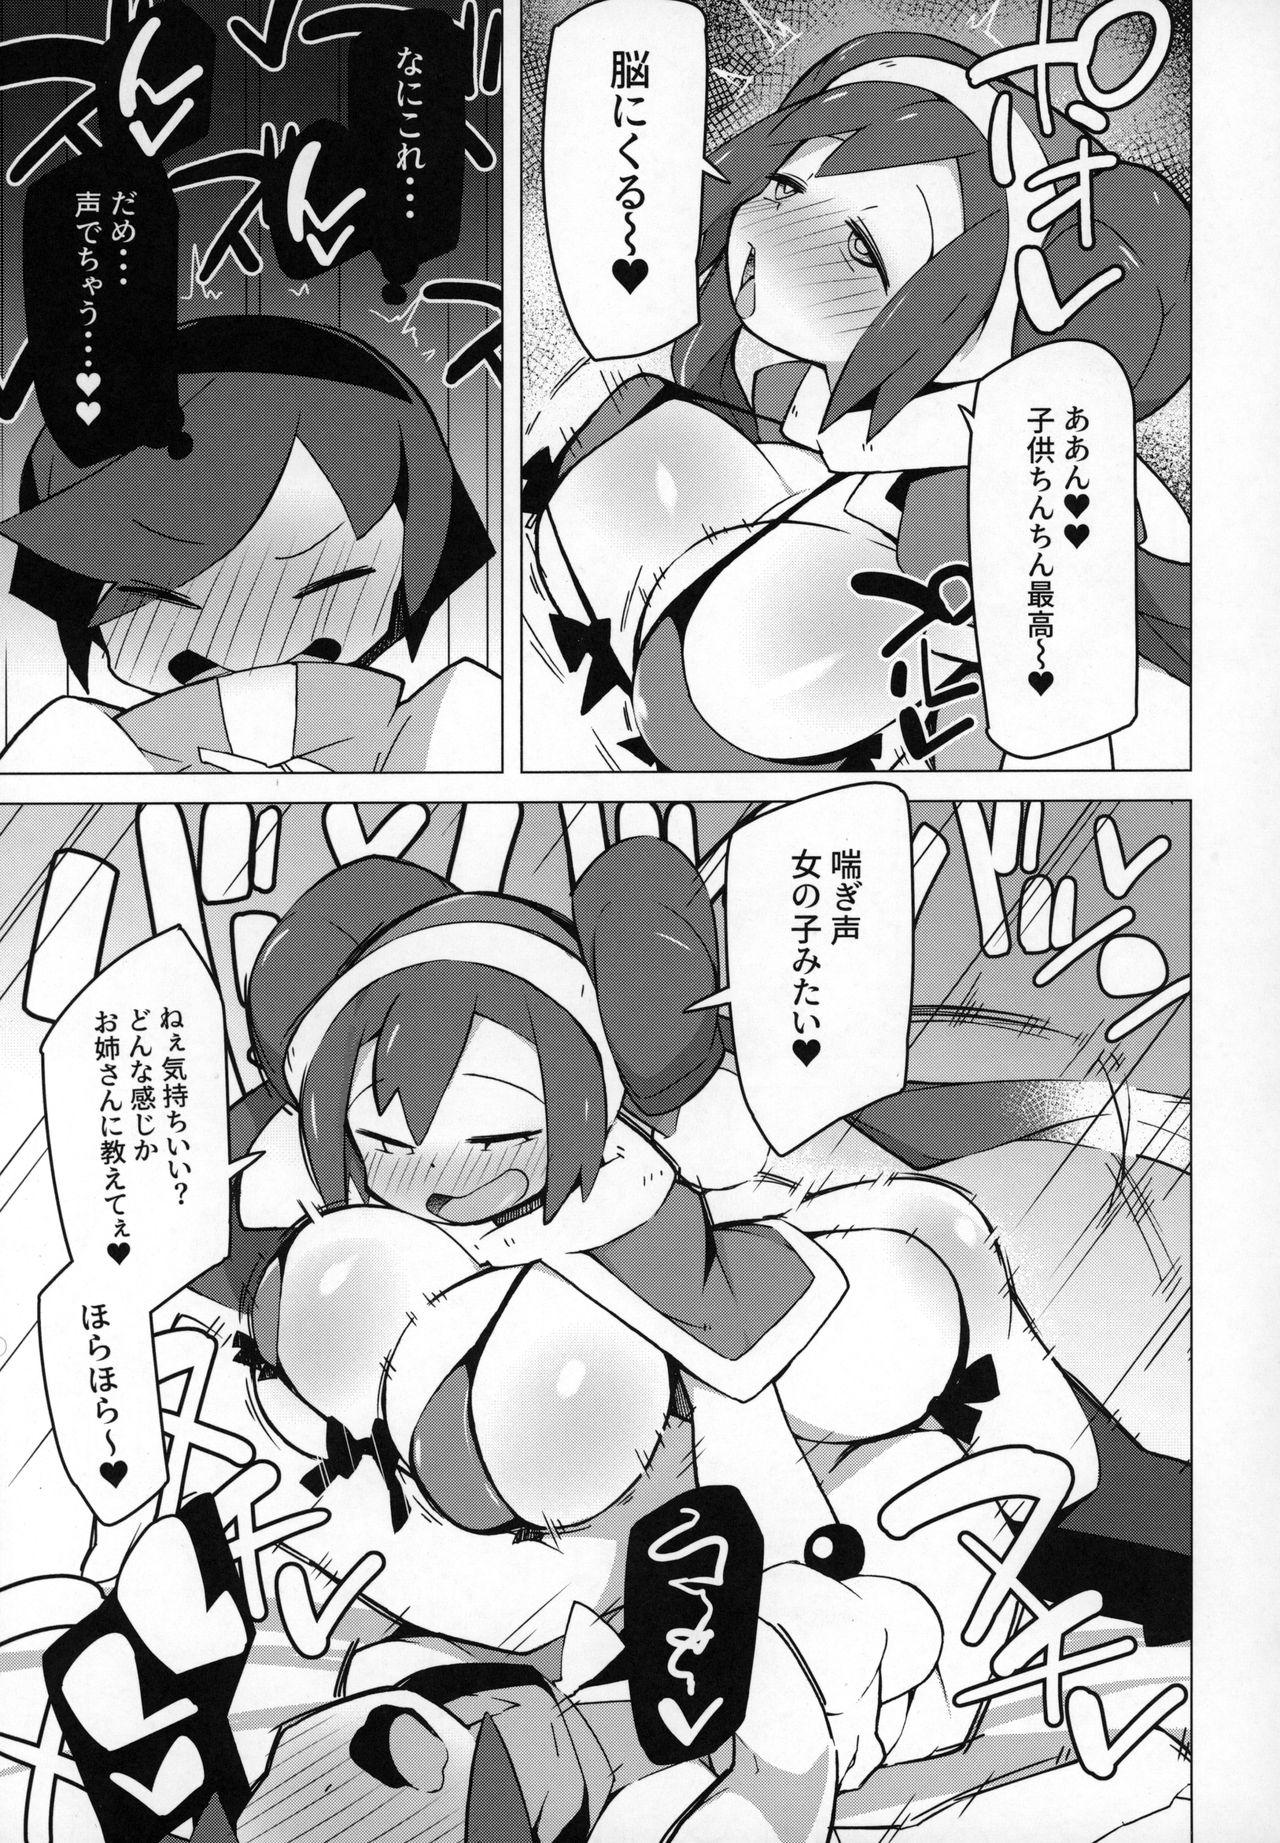 Two Marushii 2 - Pokemon Moms - Page 8